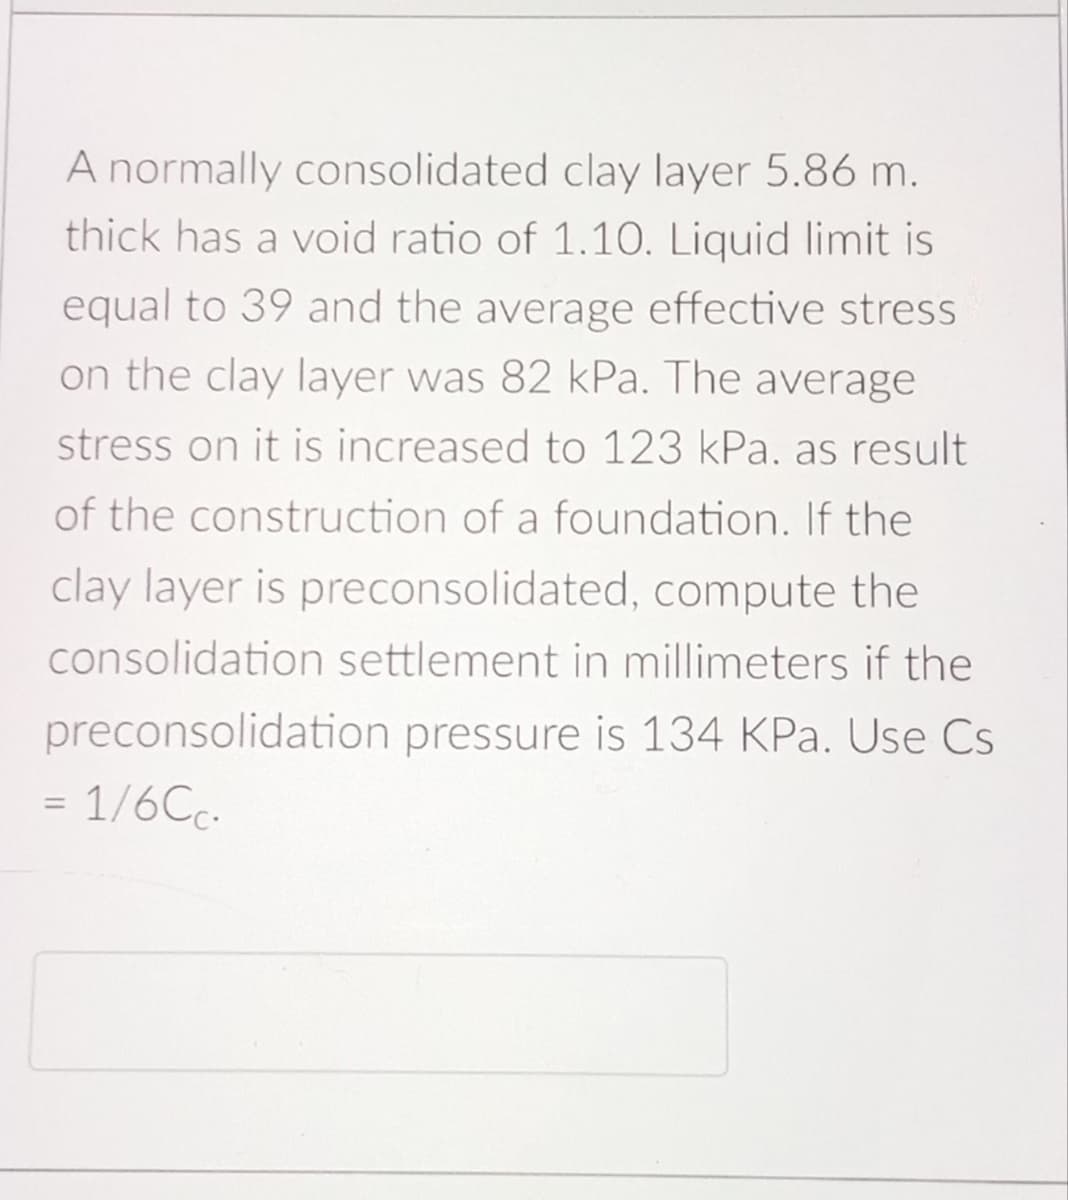 A normally consolidated clay layer 5.86 m.
thick has a void ratio of 1.10. Liquid limit is
equal to 39 and the average effective stress
on the clay layer was 82 kPa. The average
stress on it is increased to 123 kPa. as result
of the construction of a foundation. If the
clay layer is preconsolidated, compute the
consolidation settlement in millimeters if the
preconsolidation pressure is 134 KPa. Use Cs
=
1/6Cc.